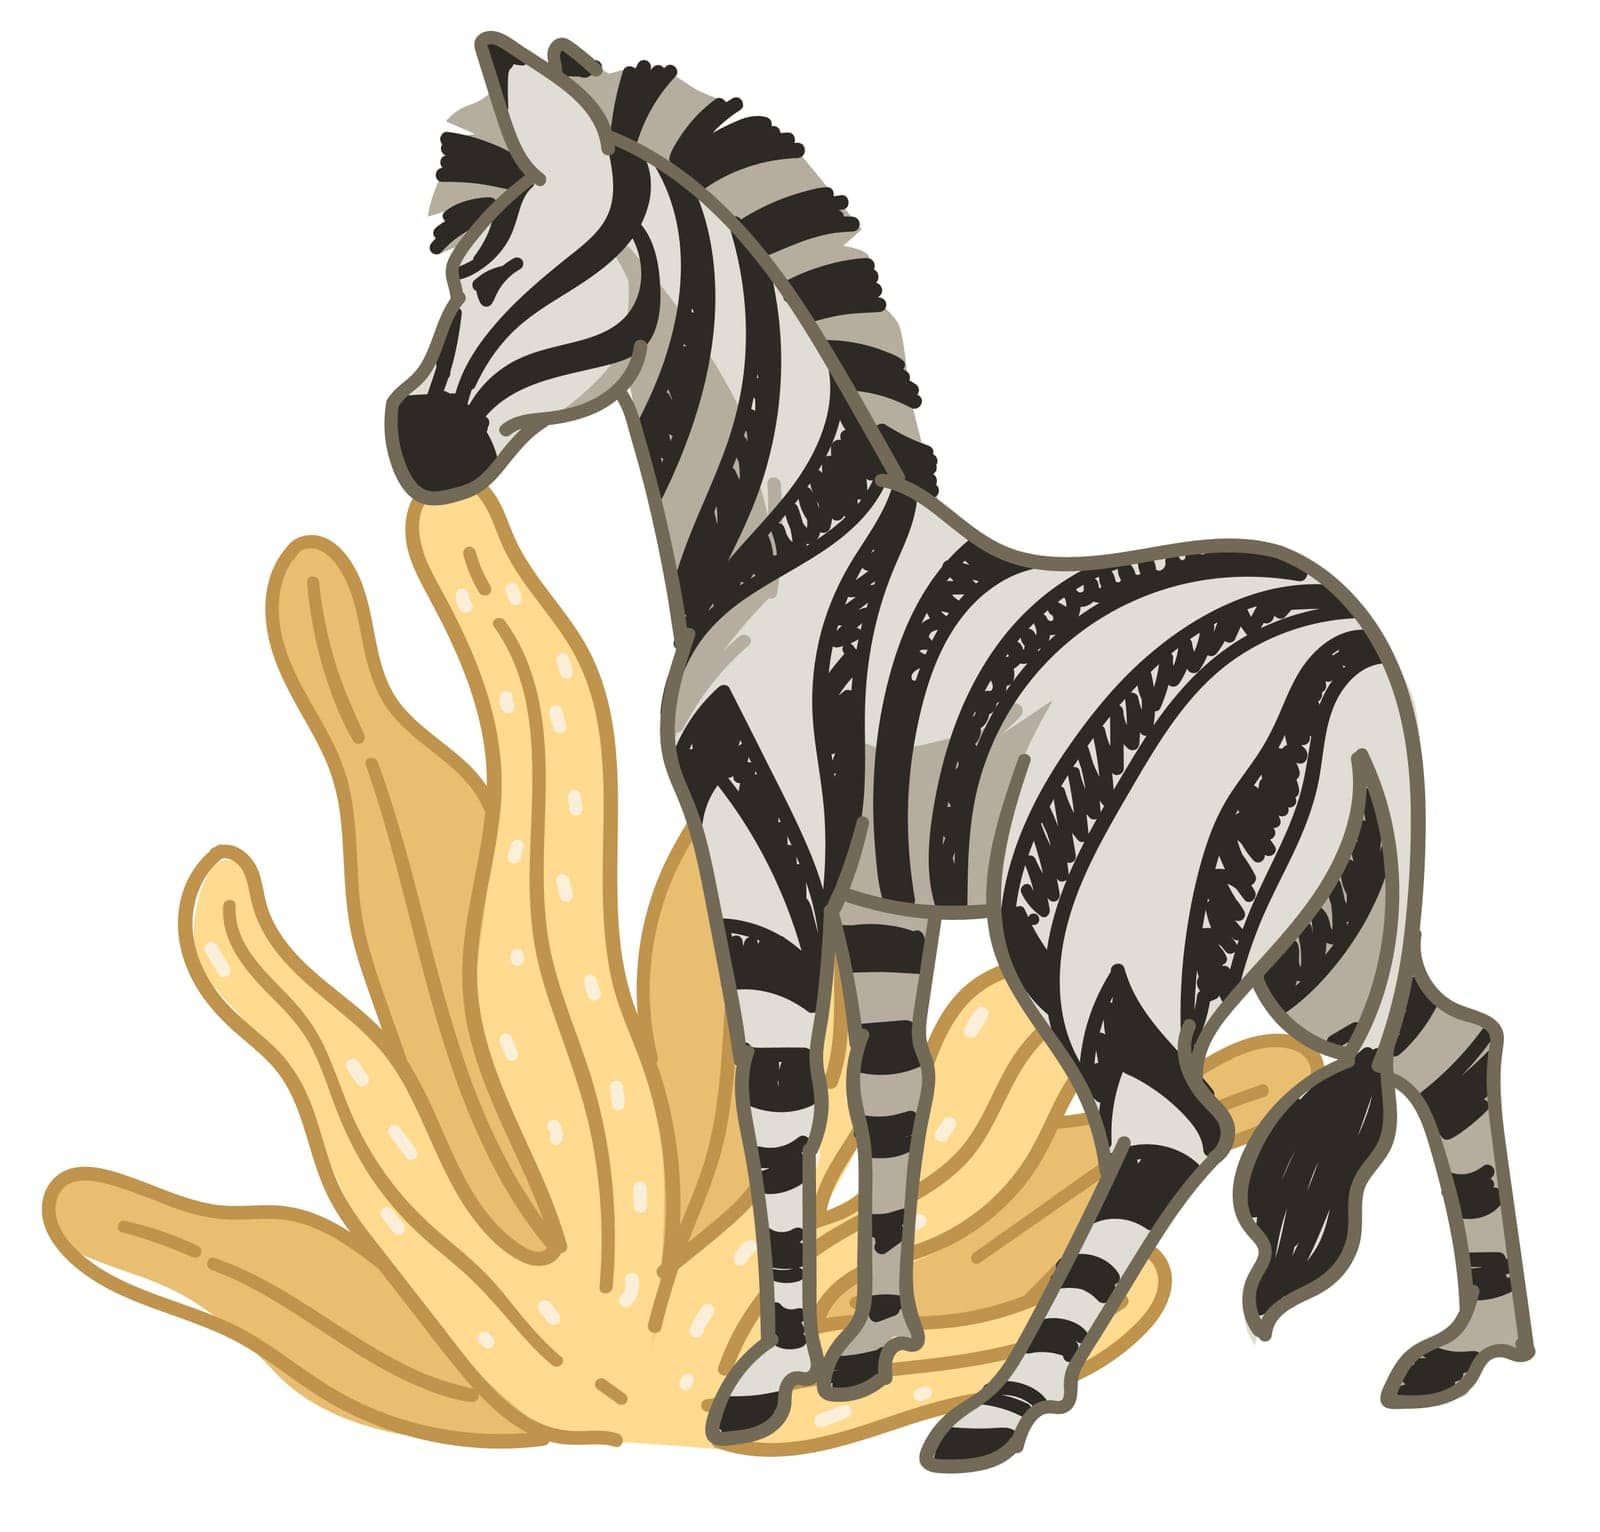 Zoo or natural reservation for animals to protect wildlife. Isolated zebra with stripes eating bush with dry yellow leaves. Savannah or africa hot climate, flora and fauna. Vector in flat style